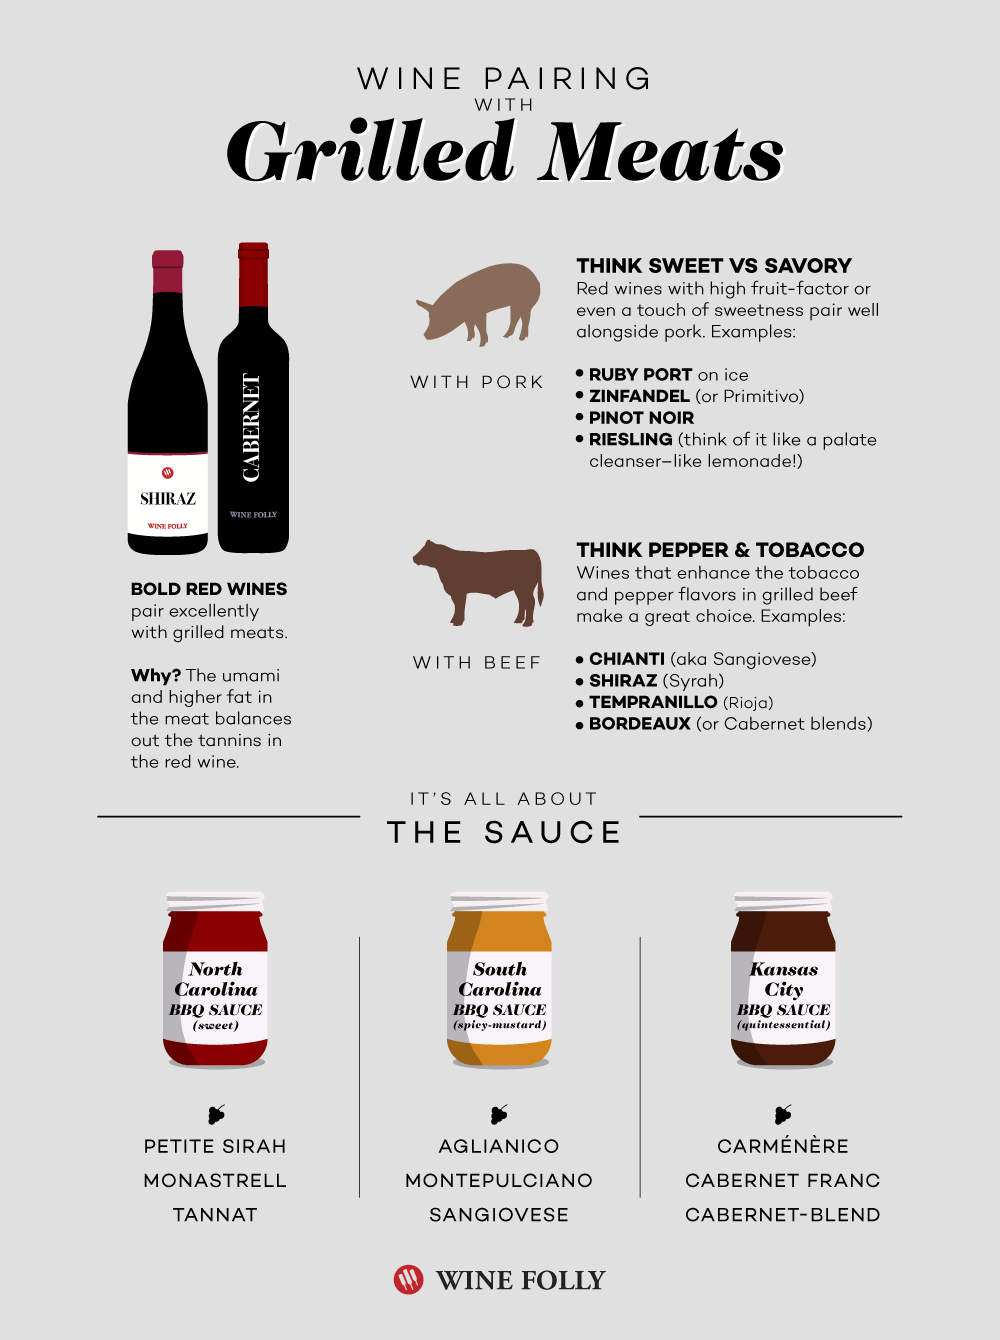 Wine Pairings with Grilled Meats, including Beef and Pork and Barbecue Sauces by Wine Folly